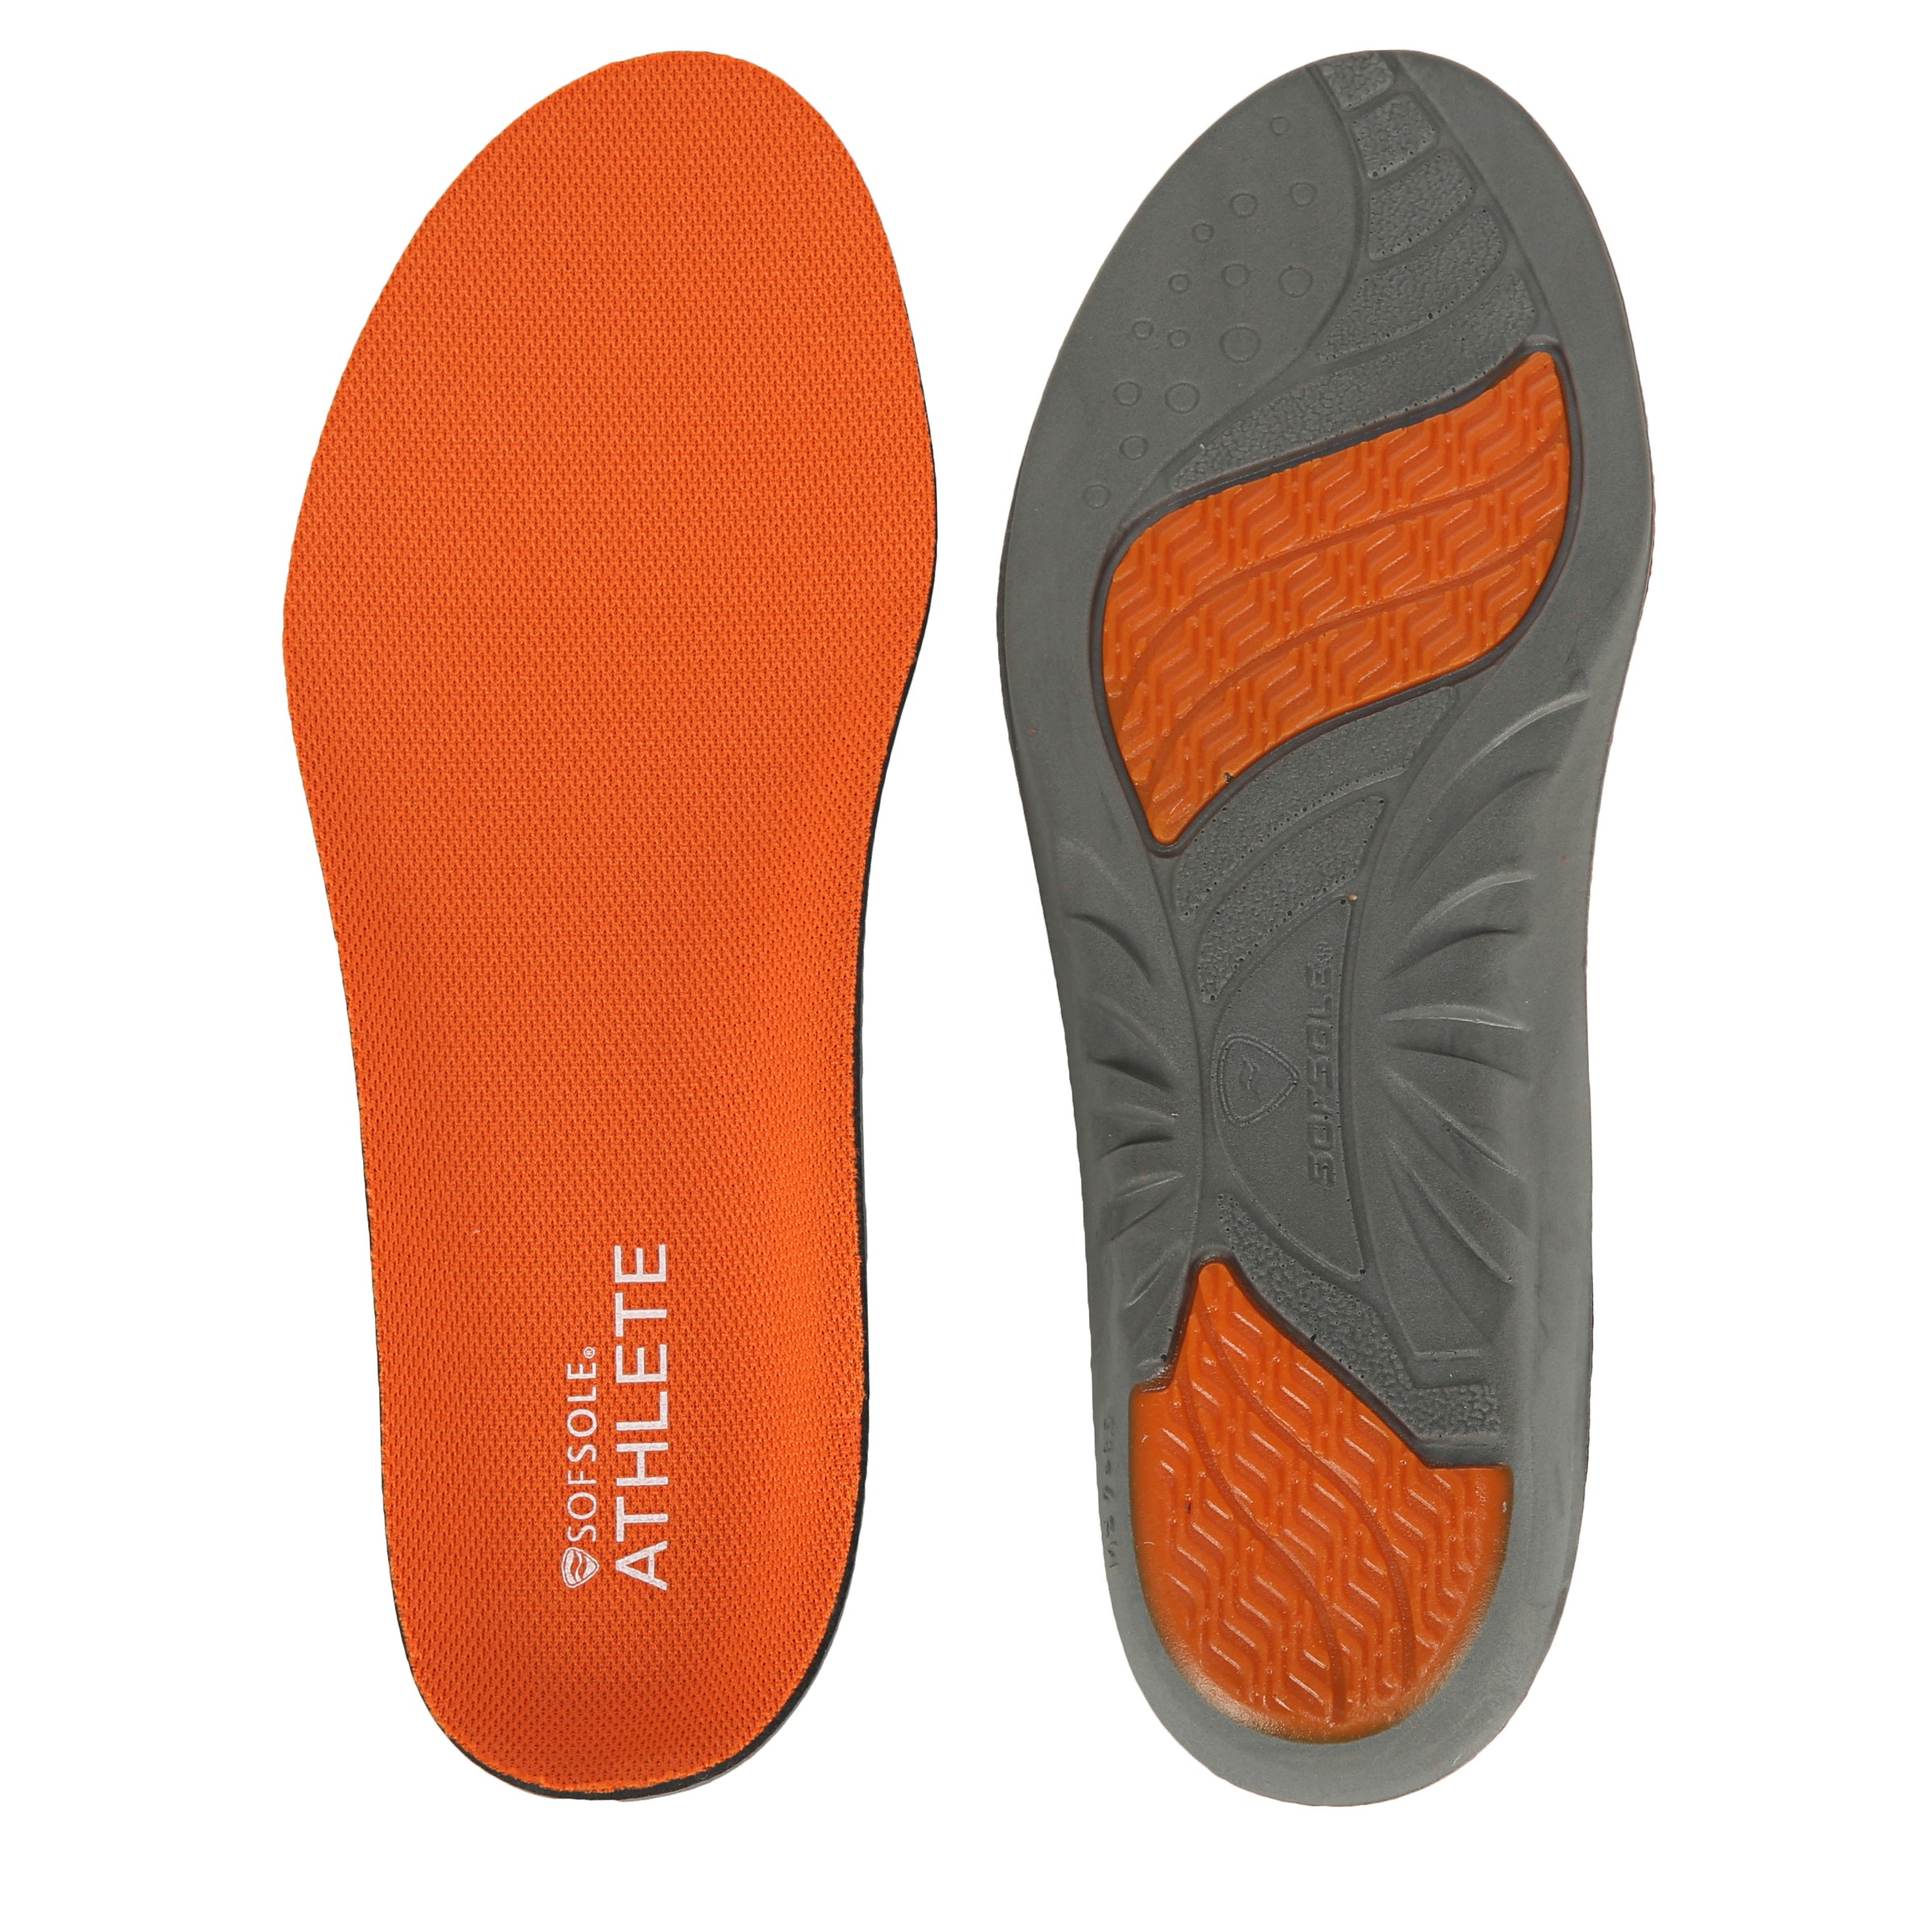 7-8.5 Sof Sole Arch Full Length Comfort High Arch Shoe Insole Men's Size 